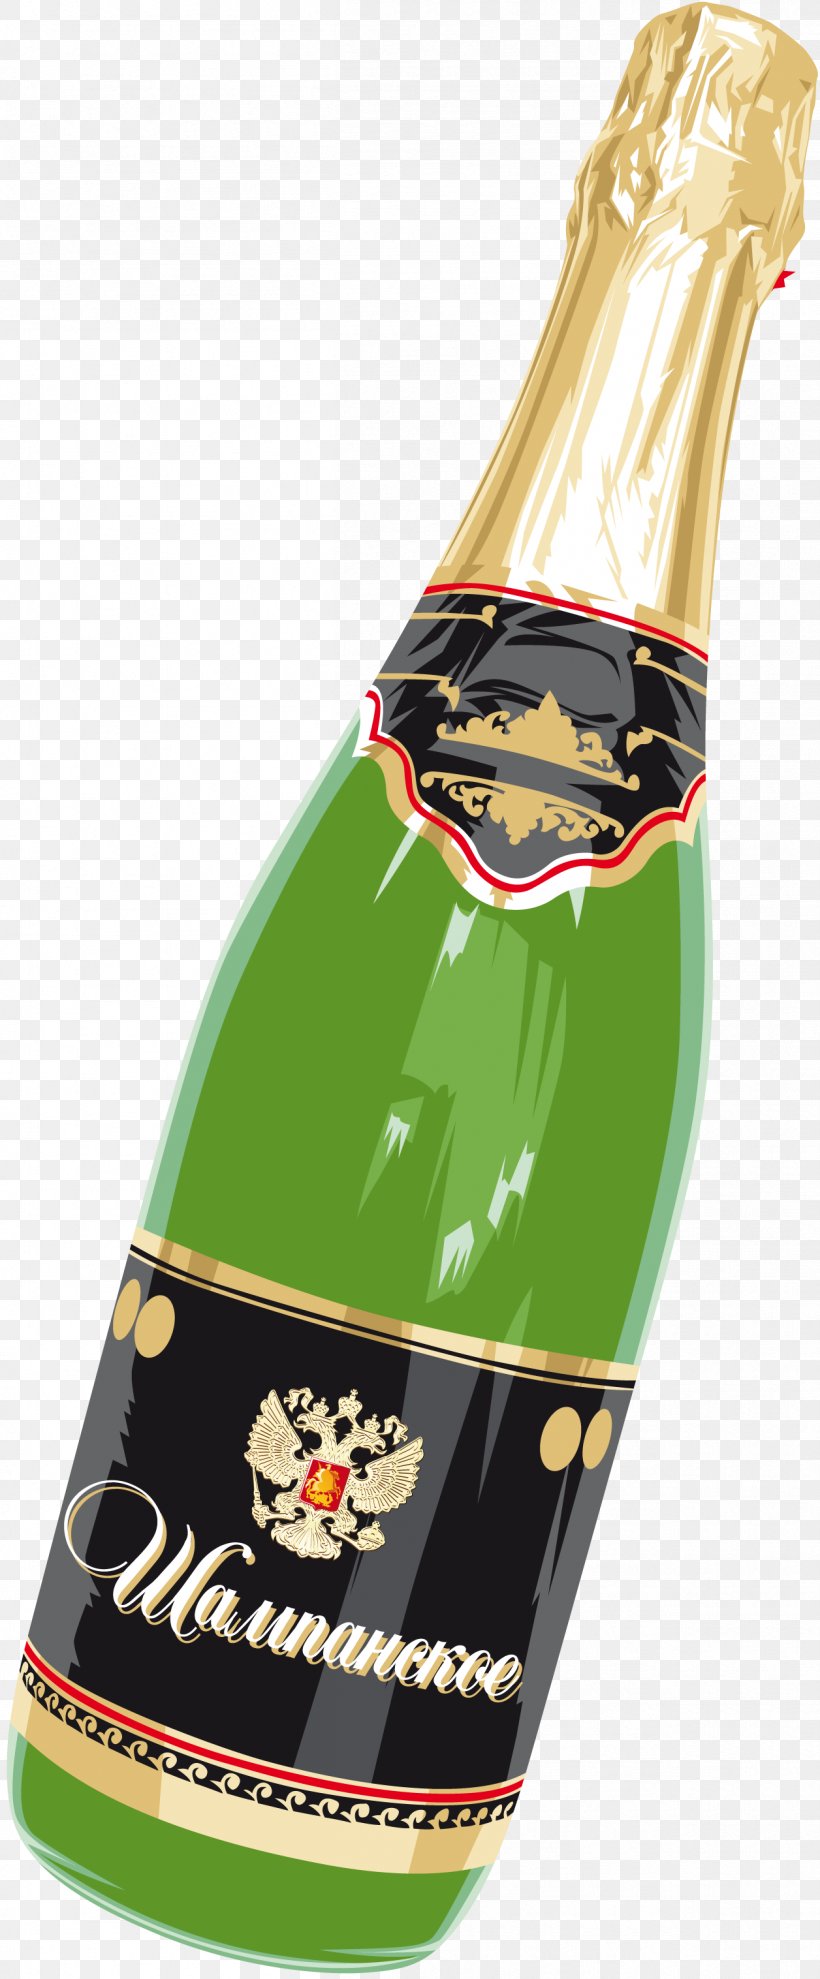 Champagne Wine Bottle Alcoholic Drink Birthday, PNG, 1256x3032px, Champagne, Alcoholic Drink, Beer Bottle, Birthday, Bottle Download Free